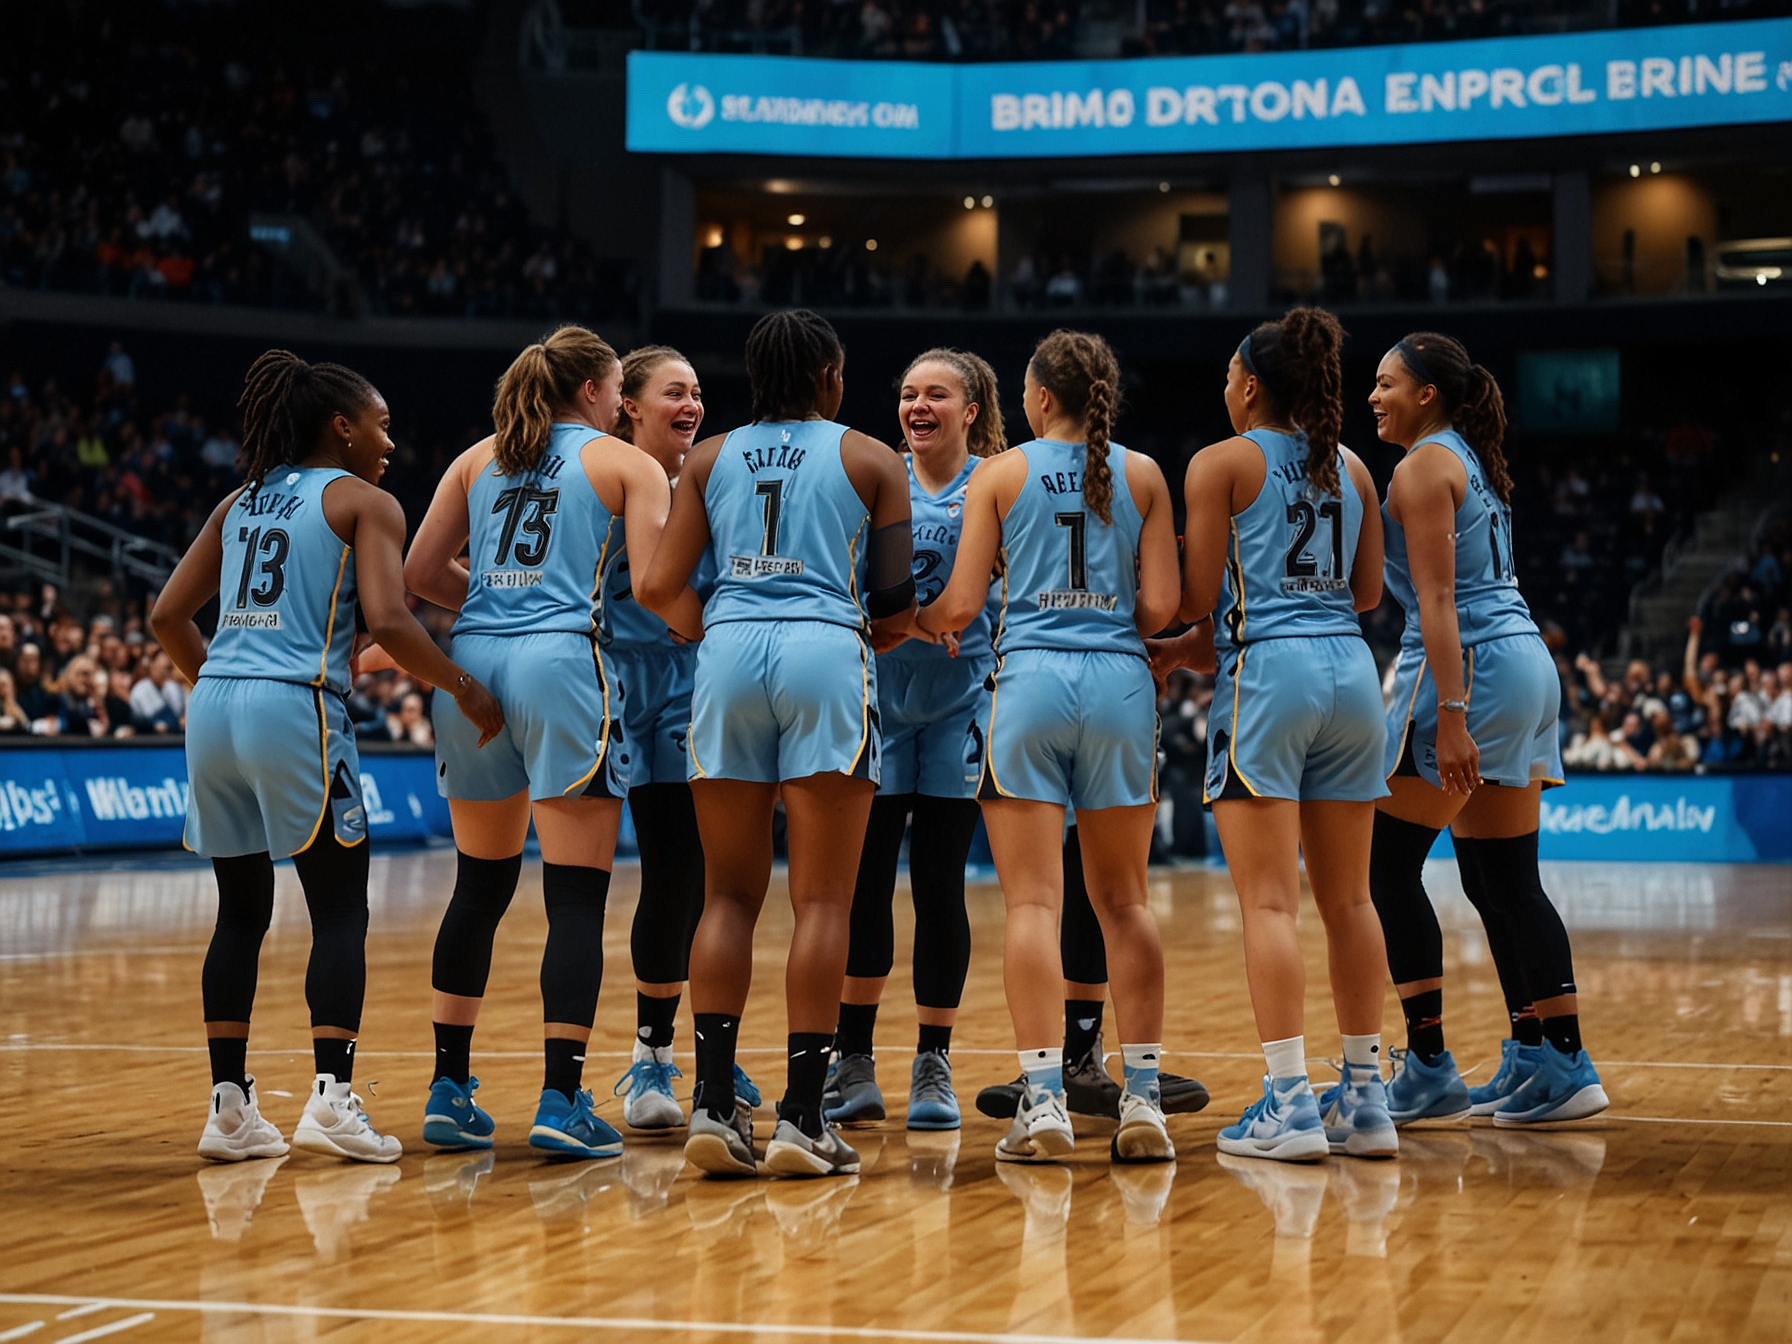 The Chicago Sky team celebrates on the court at Wintrust Arena, highlighting their victory over the Dallas Wings, with Angel Reese prominently positioned, demonstrating her pivotal role in the win.